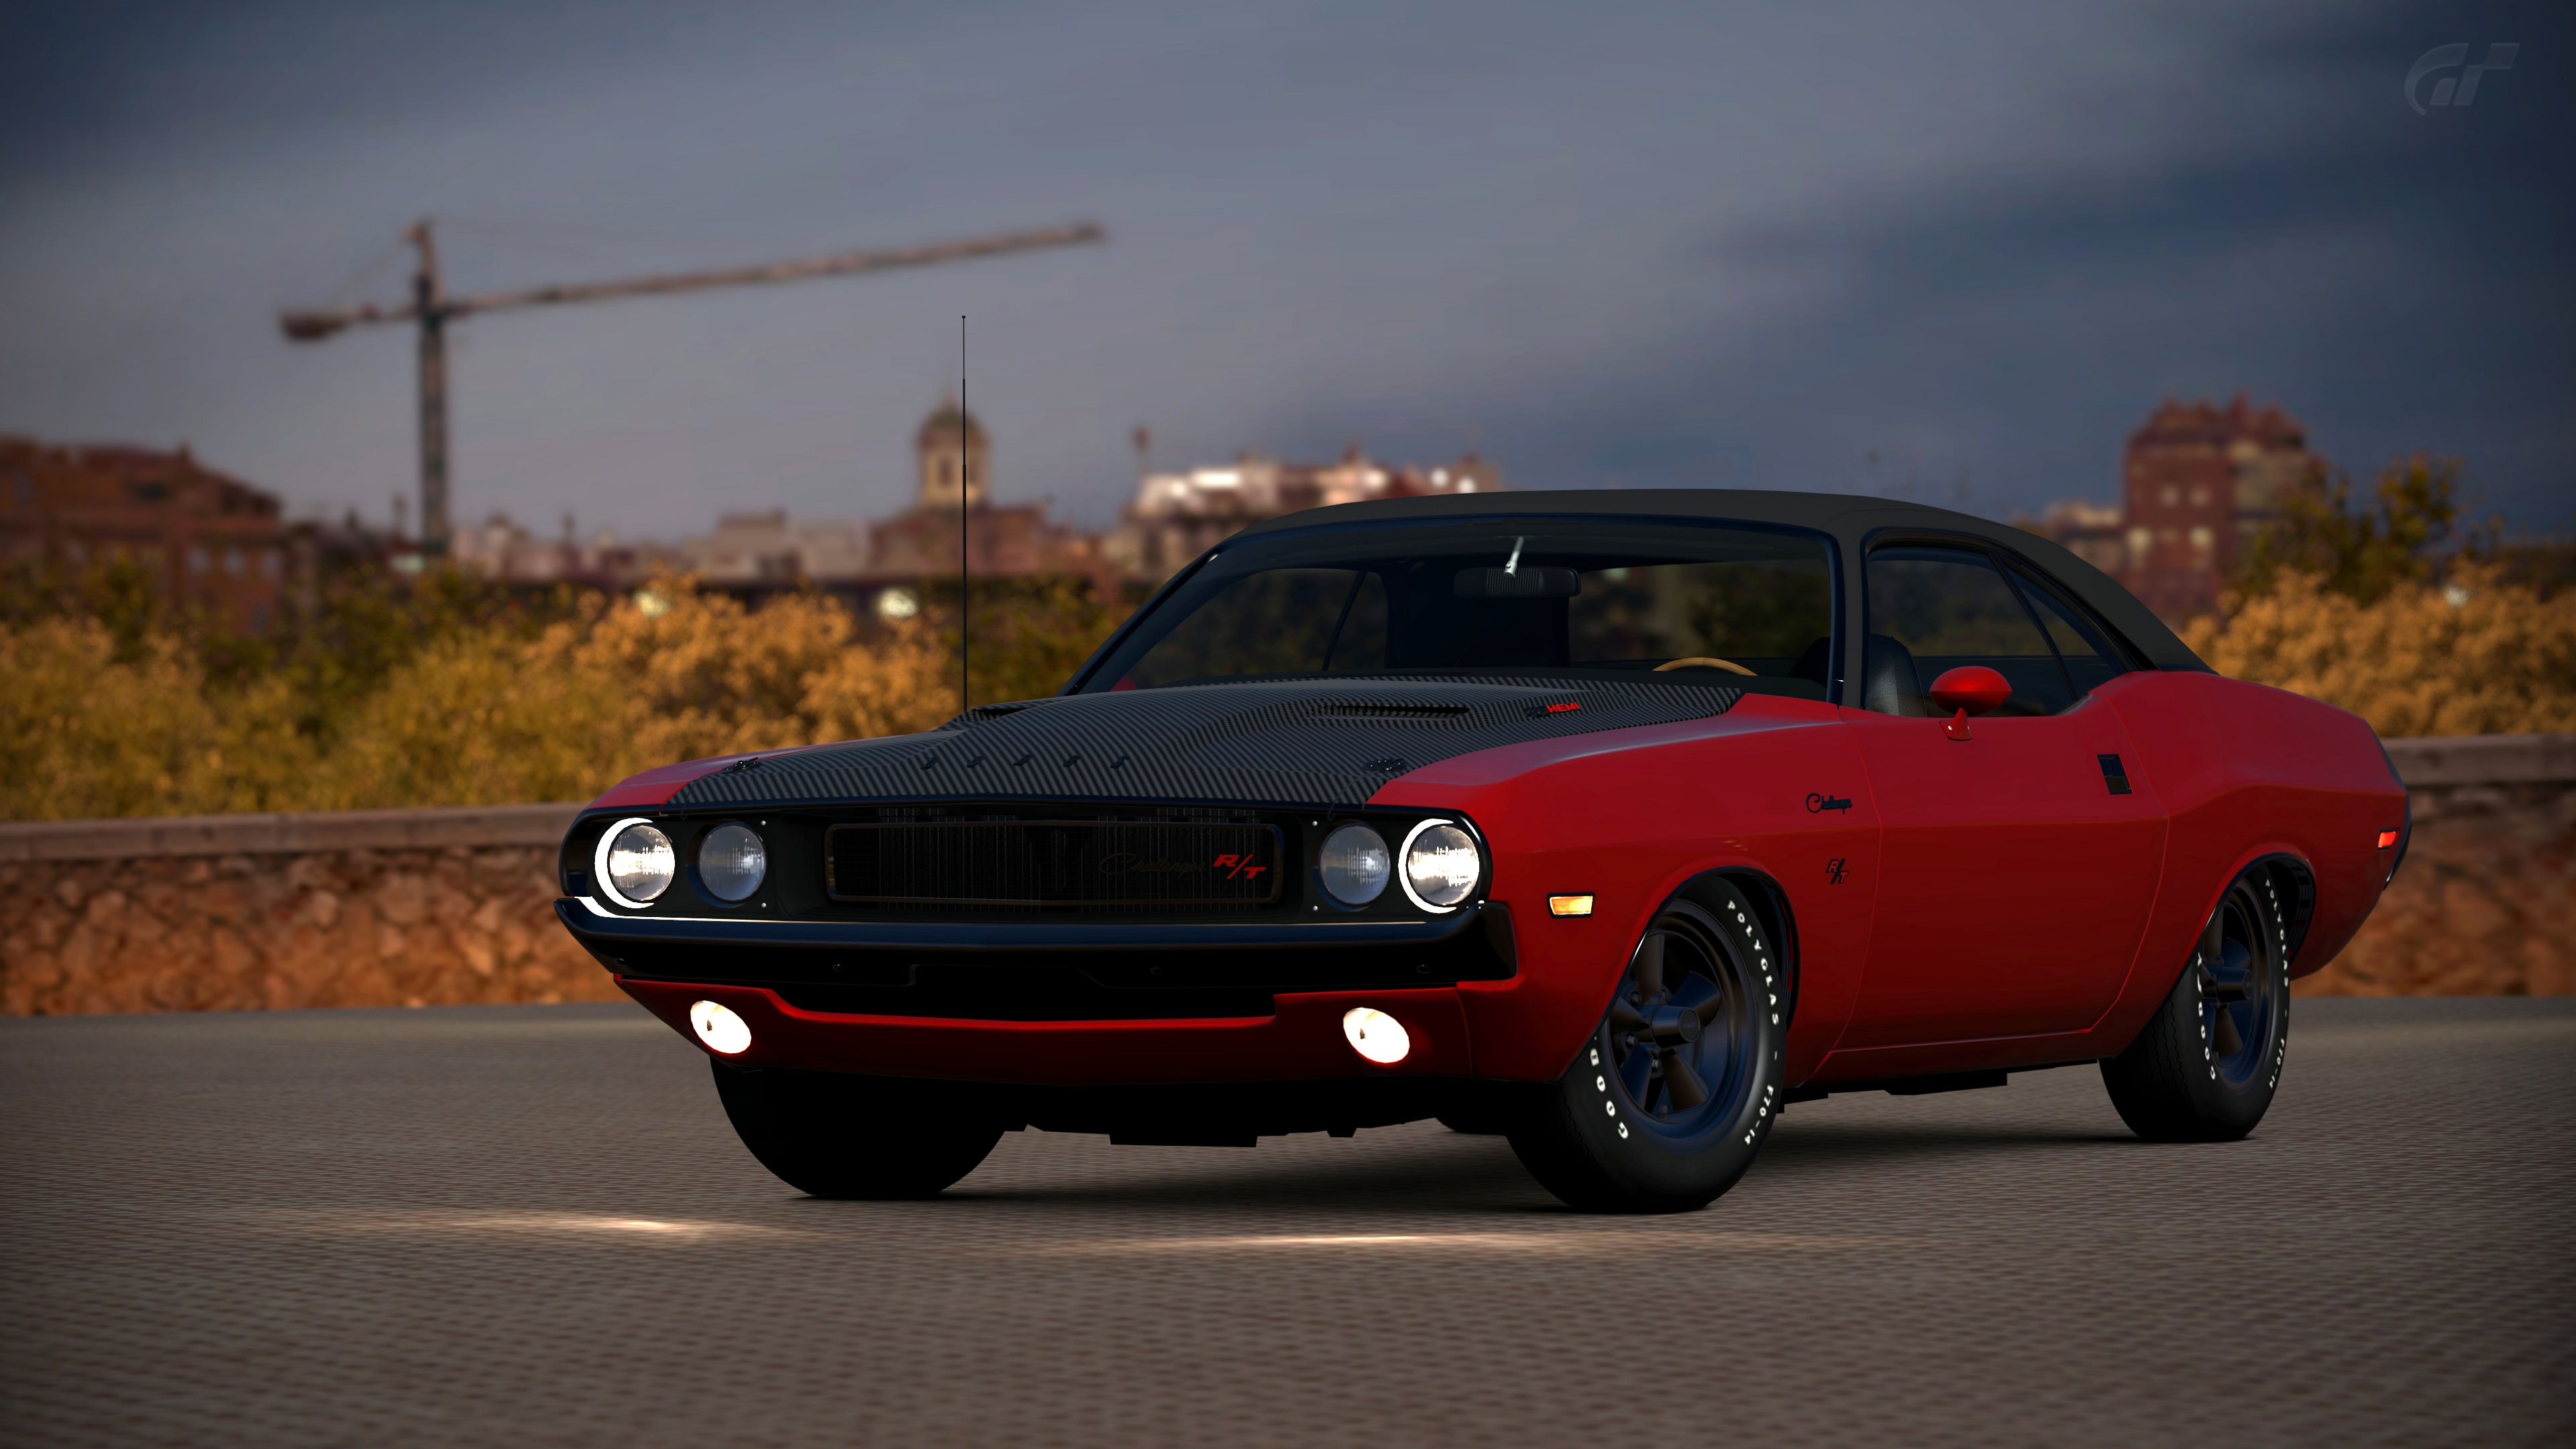 Dodge Challenger, Pin on challengers, Automotive passion, Speed and power, 3840x2160 4K Desktop